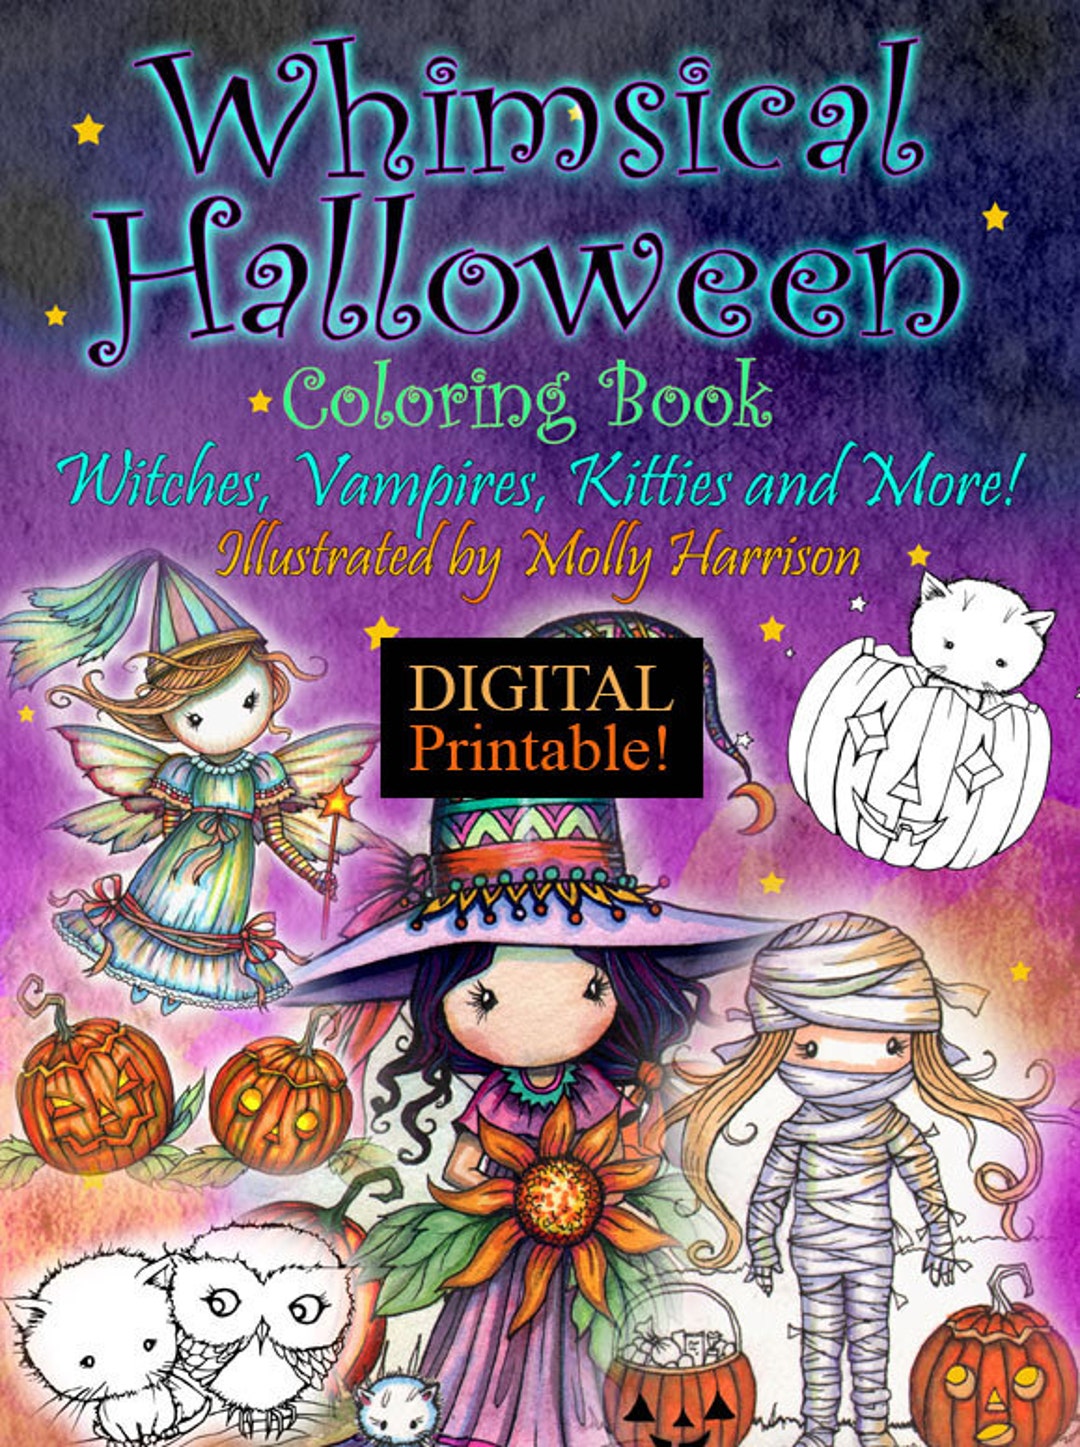 Printable Digital Download Whimsical Halloween Coloring Book by Molly ...